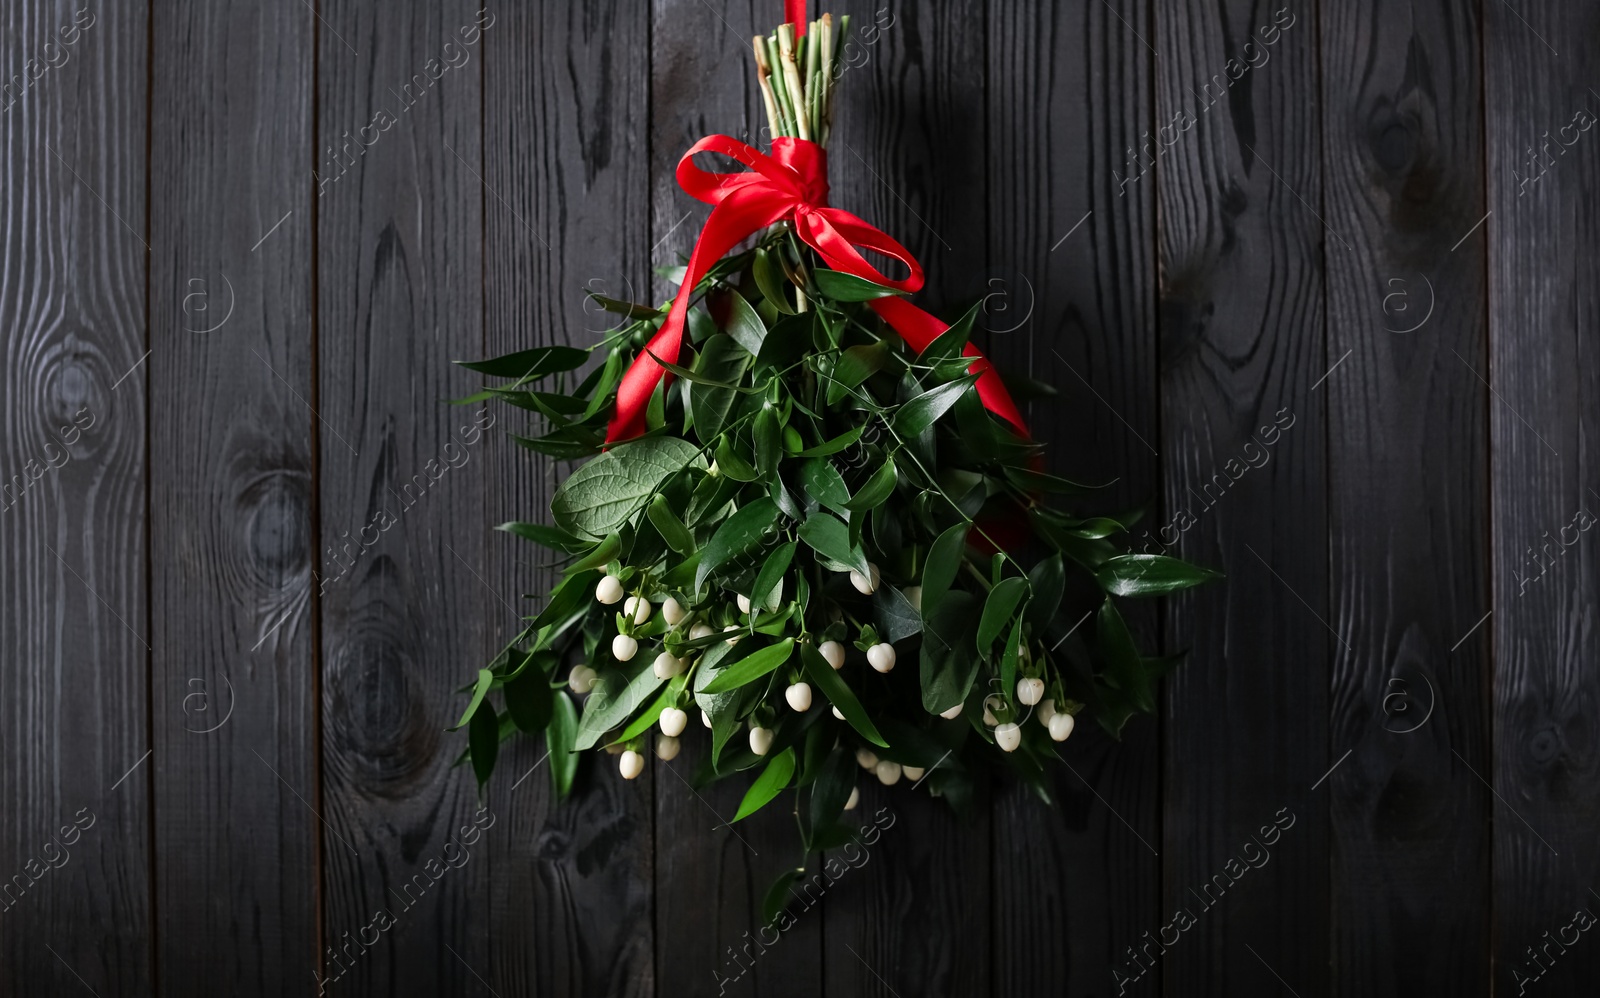 Photo of Mistletoe bunch with red bow hanging on dark wooden wall. Traditional Christmas decor